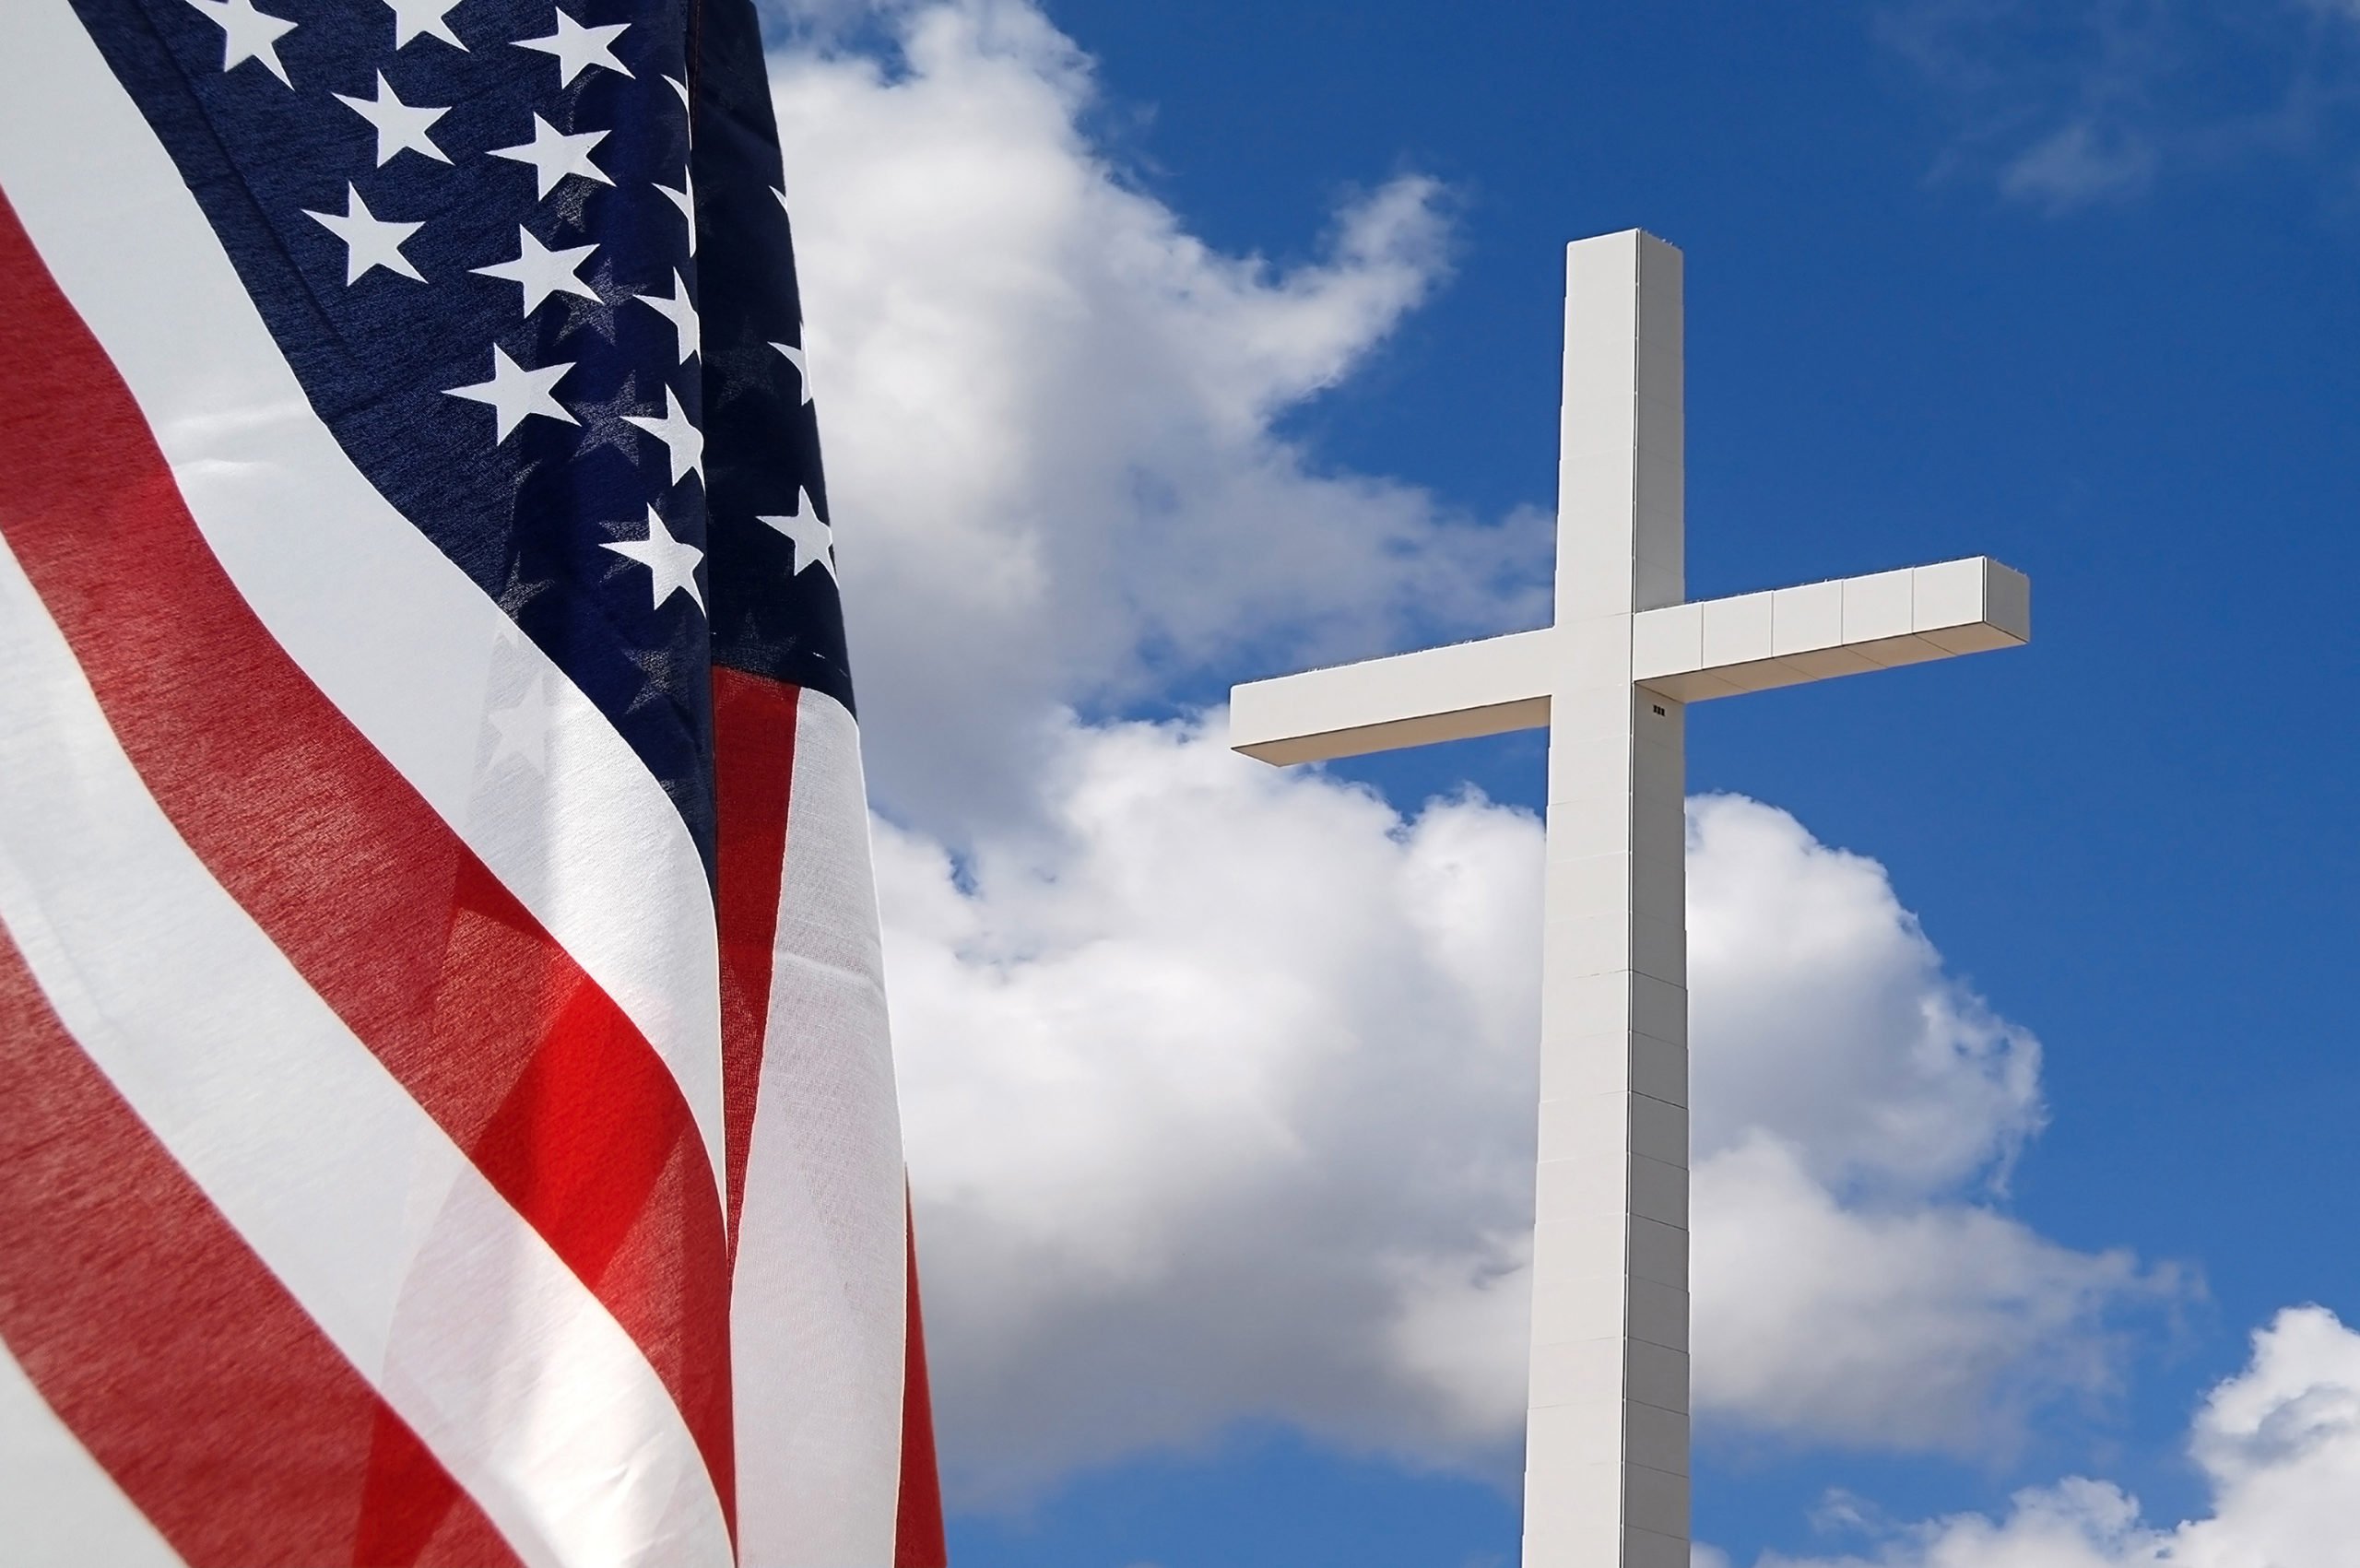 An American flag hangs in the foreground, upstaging a white cross.